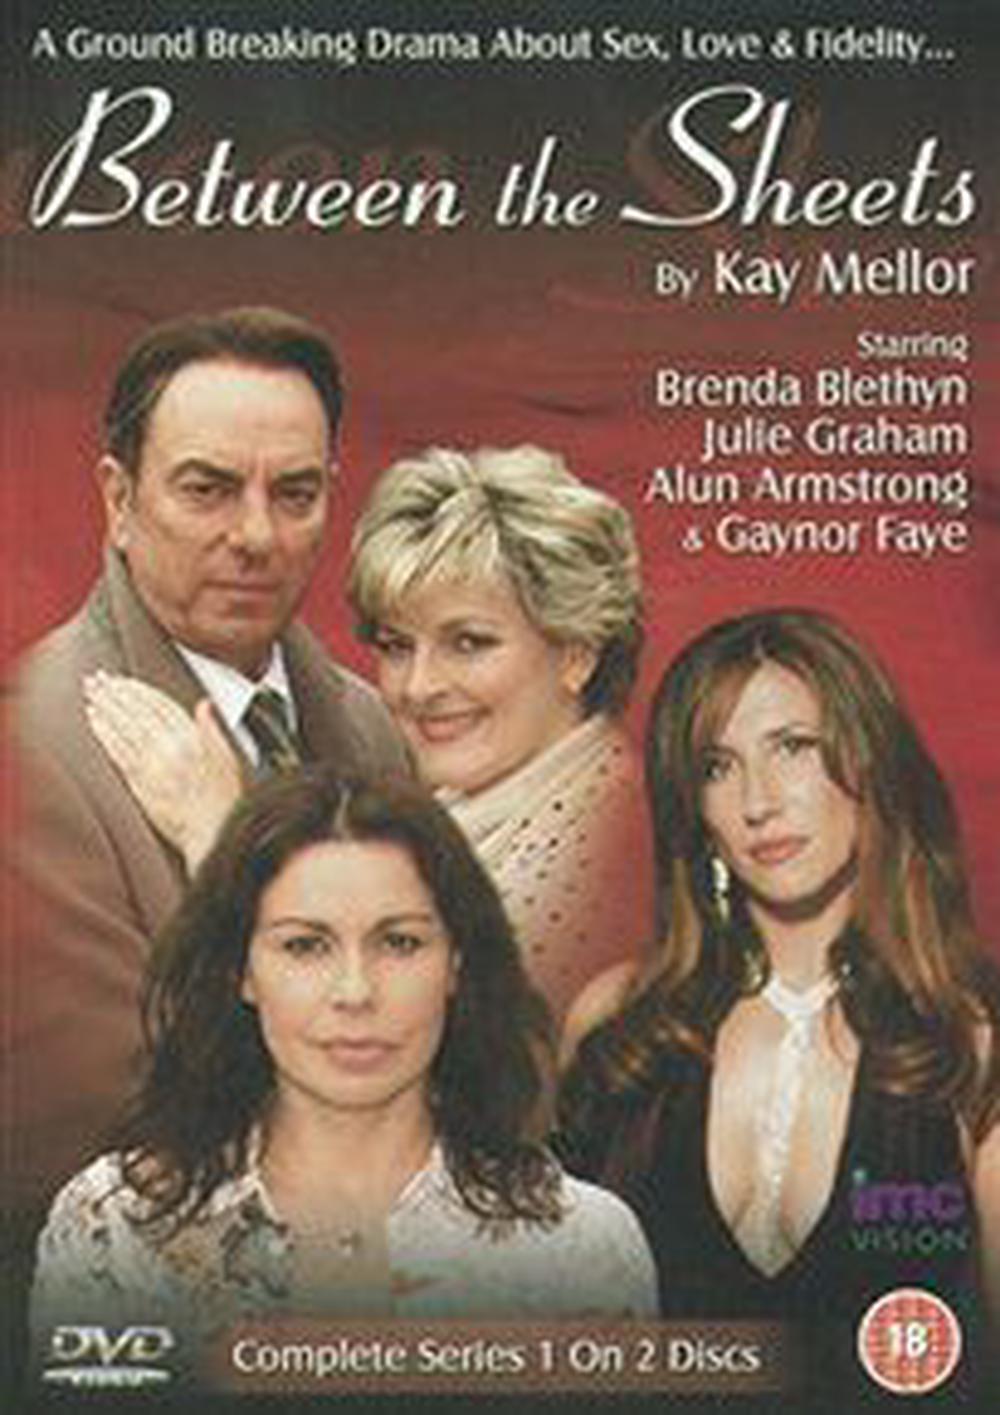 Between the Sheets, DVD | Buy online at The Nile